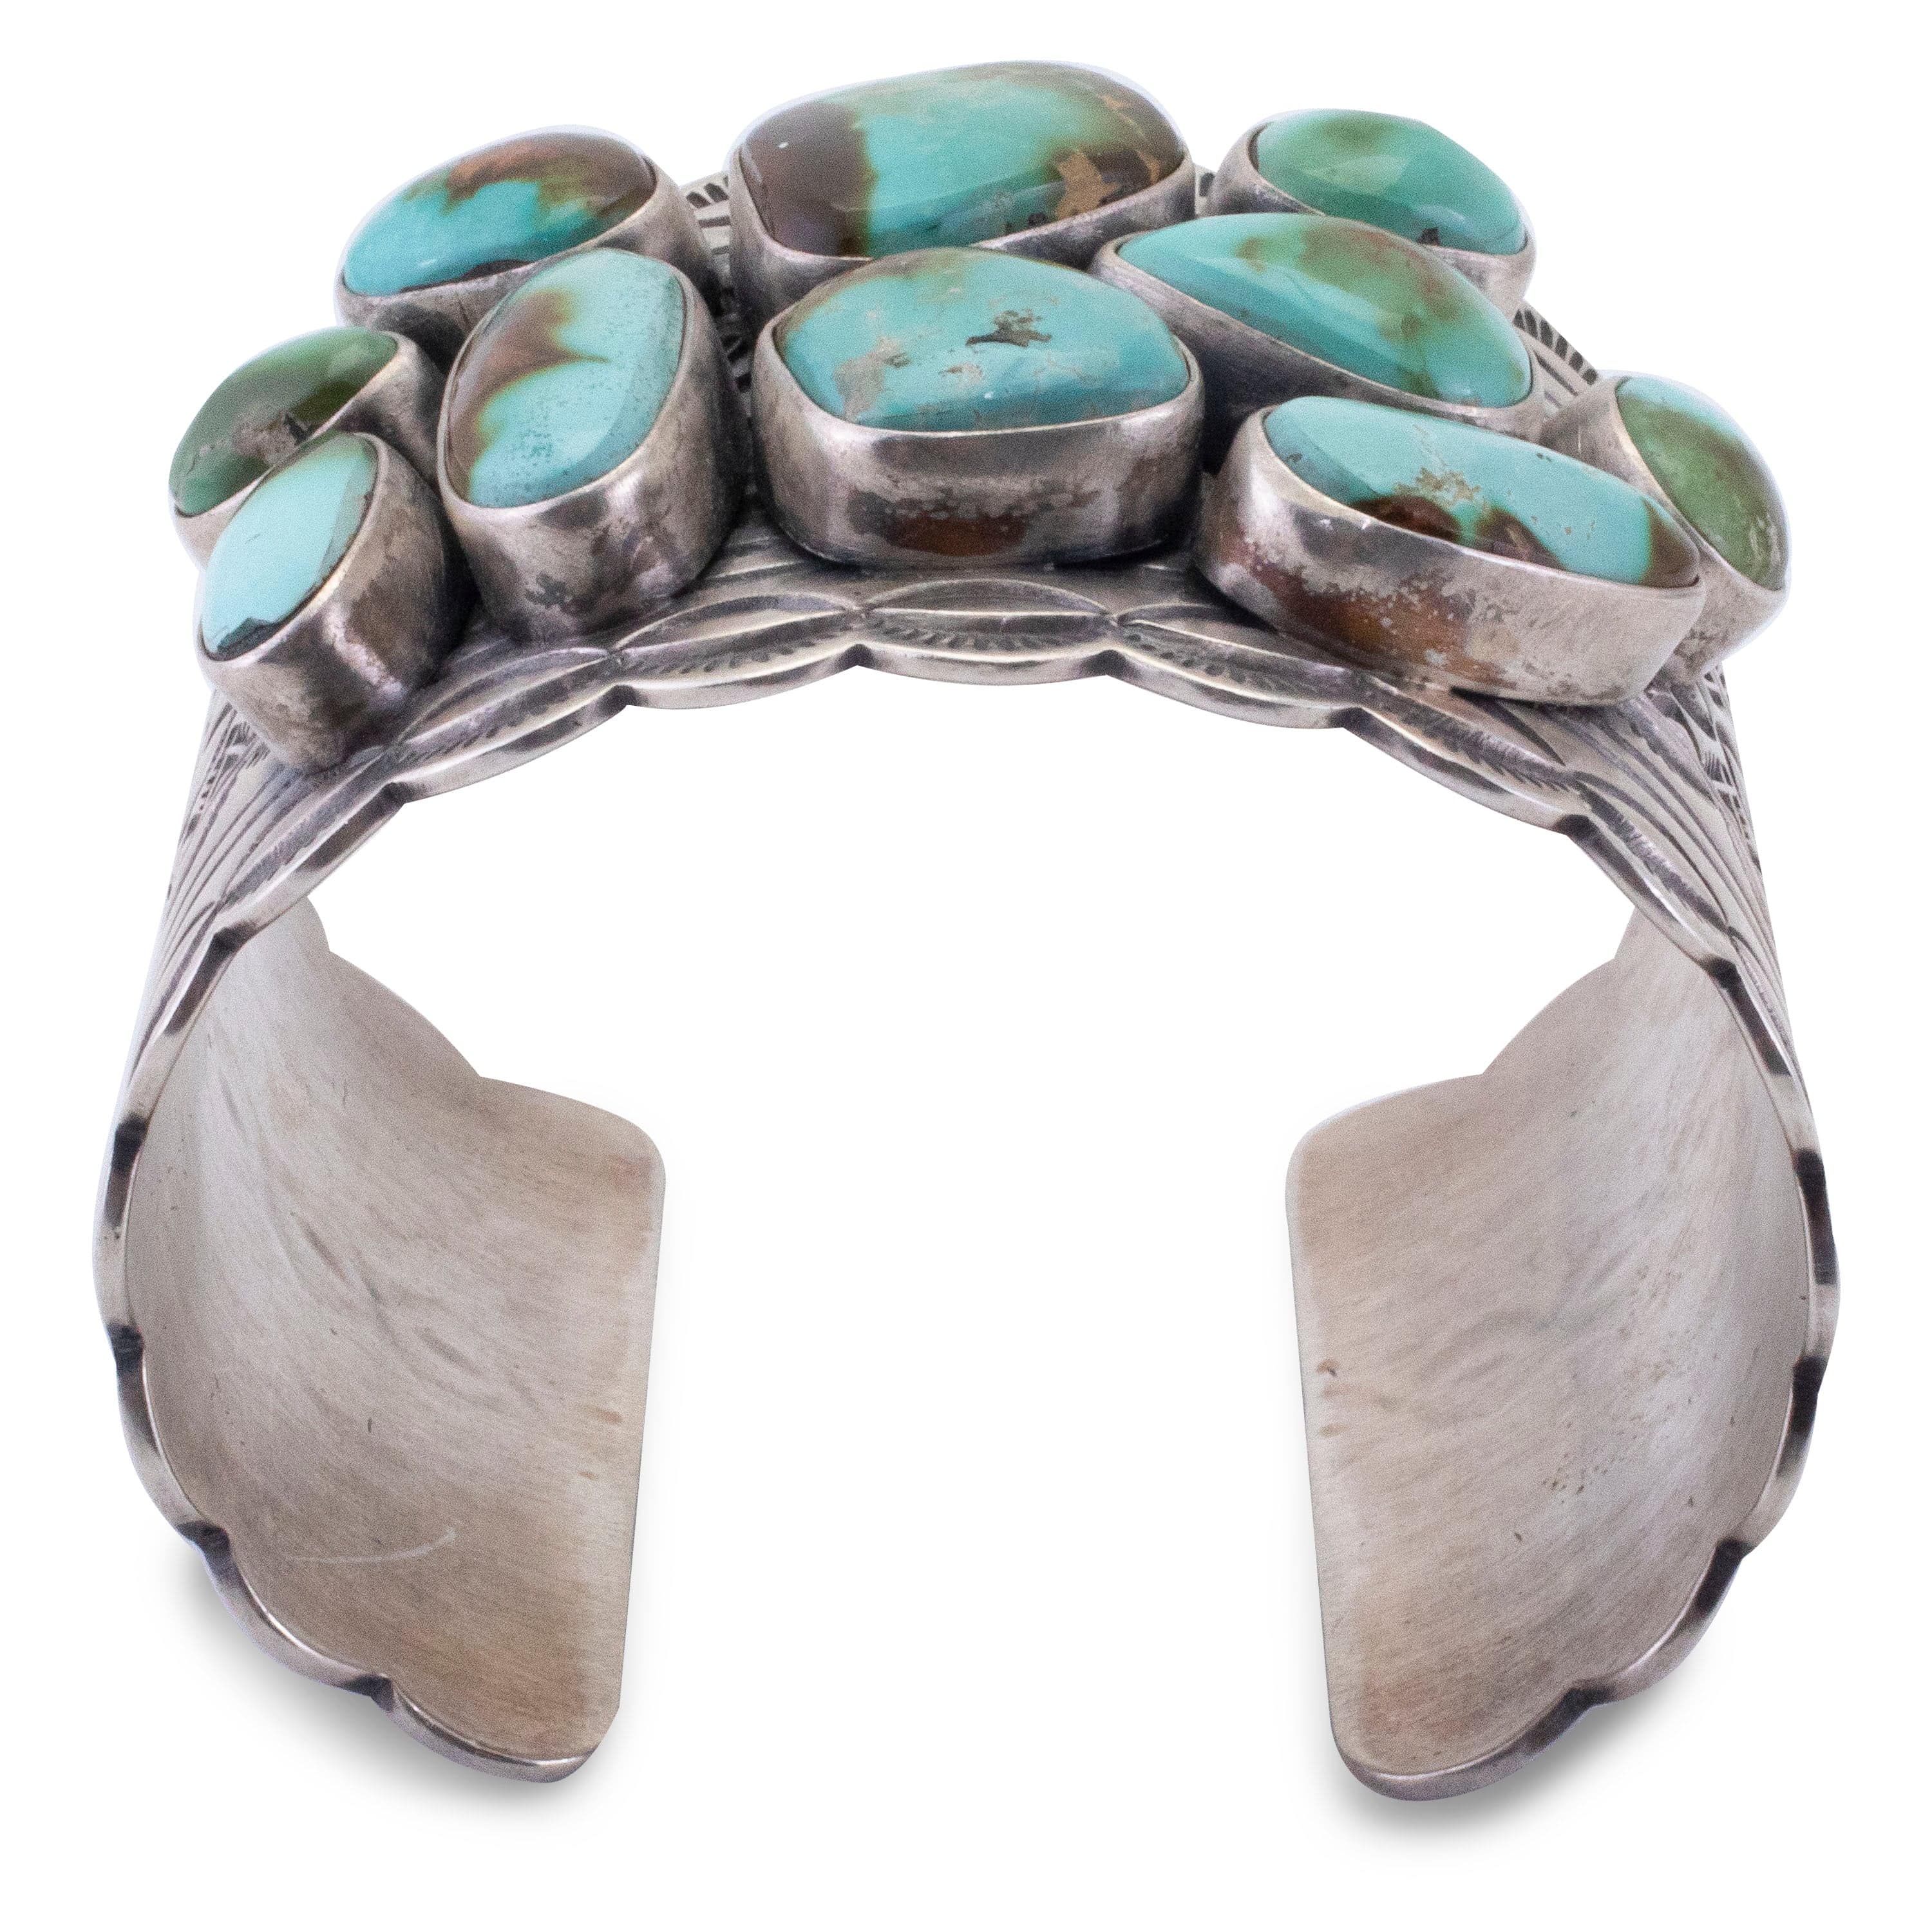 Kalifano Native American Jewelry Ray Bennett Navajo Royston Turquoise USA Native American Made 925 Sterling Silver Cuff NAB6000.002